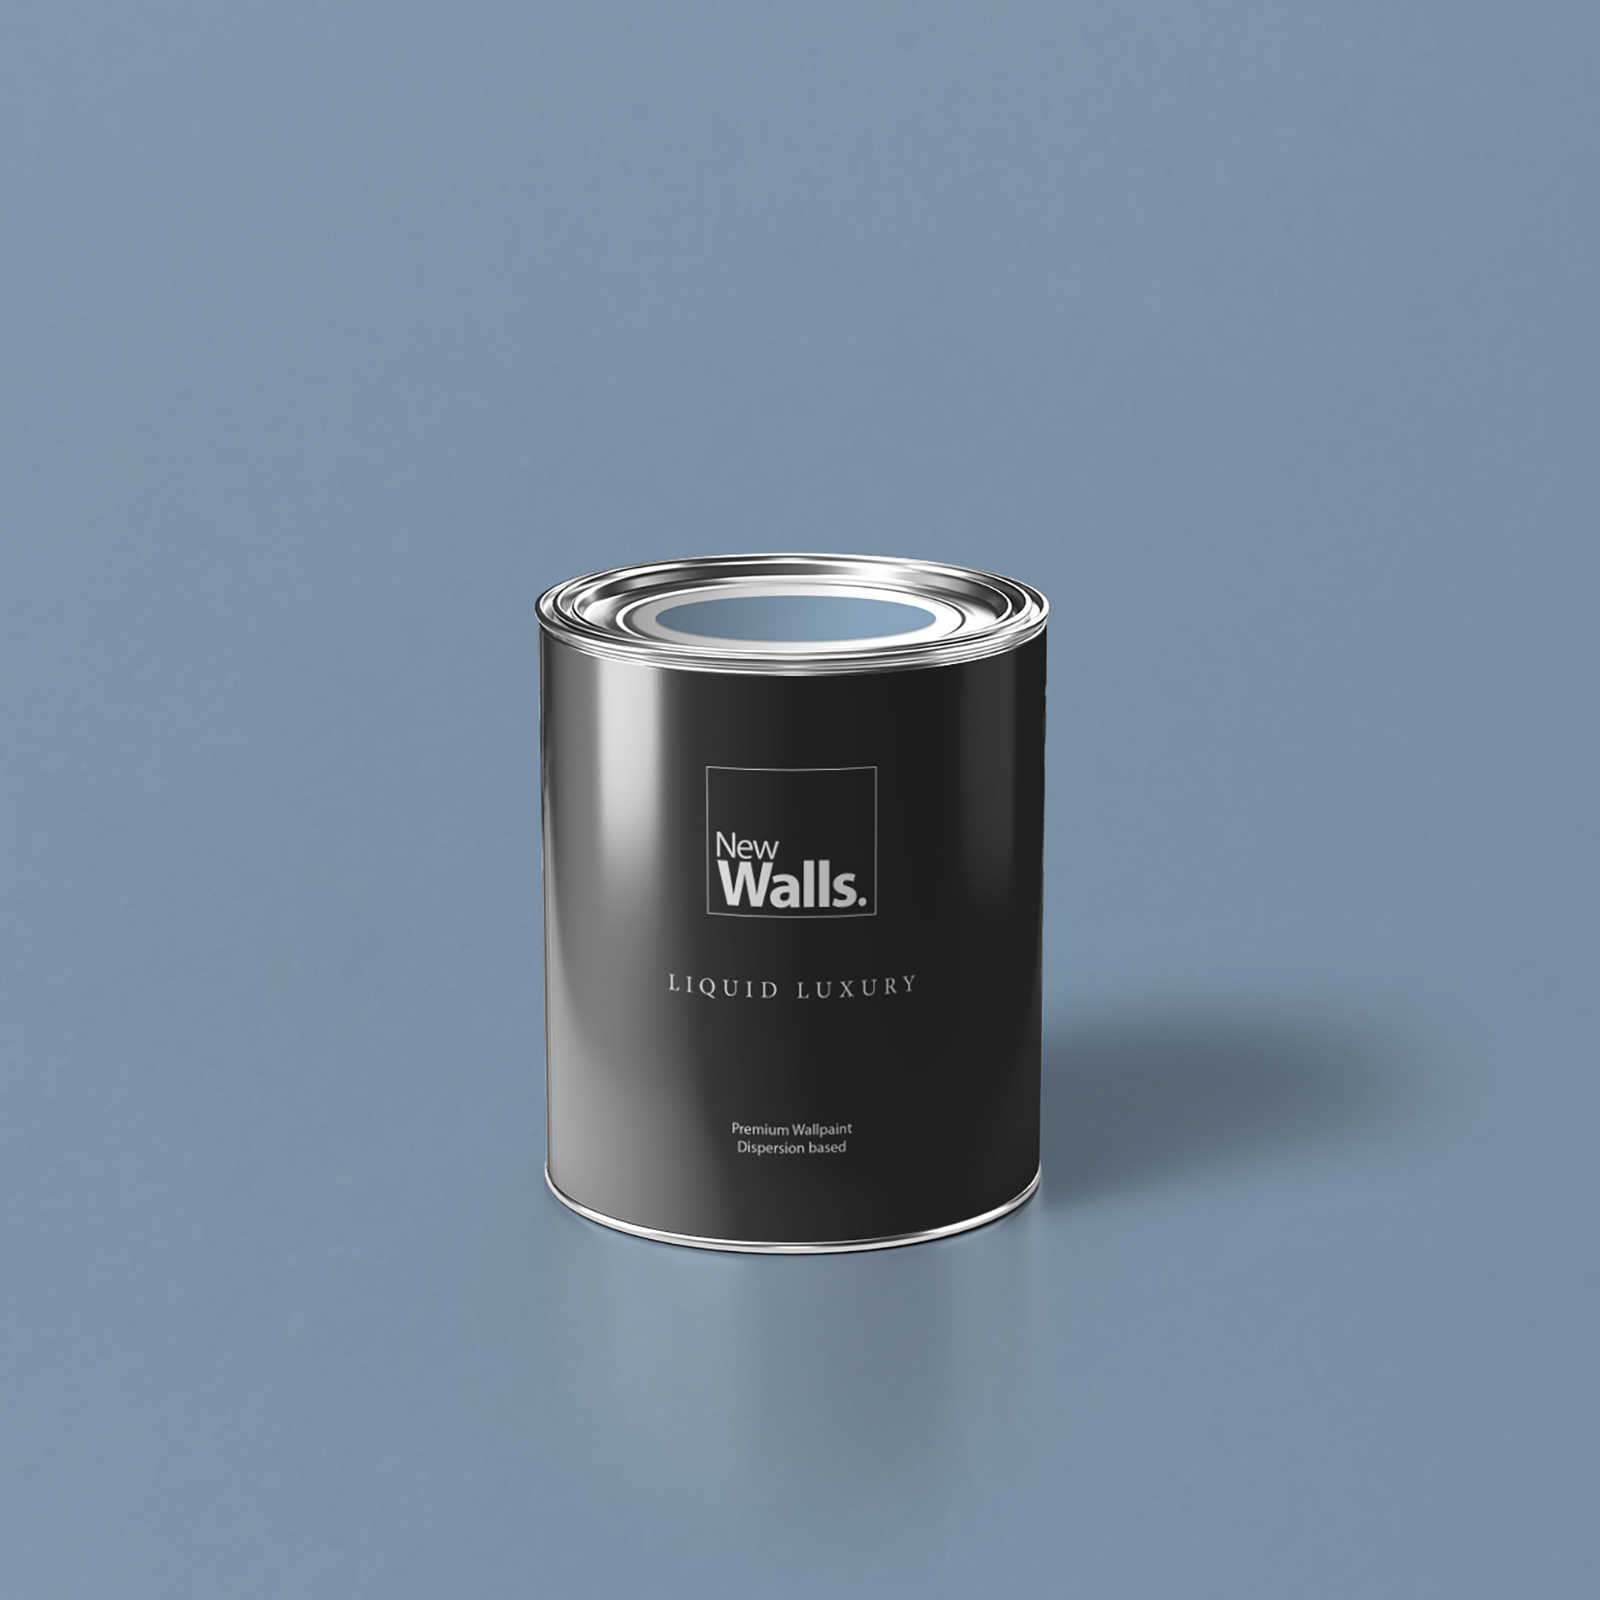         Premium Wall Paint Balanced Nordic Blue »Blissful Blue« NW305 – 1 litre
    